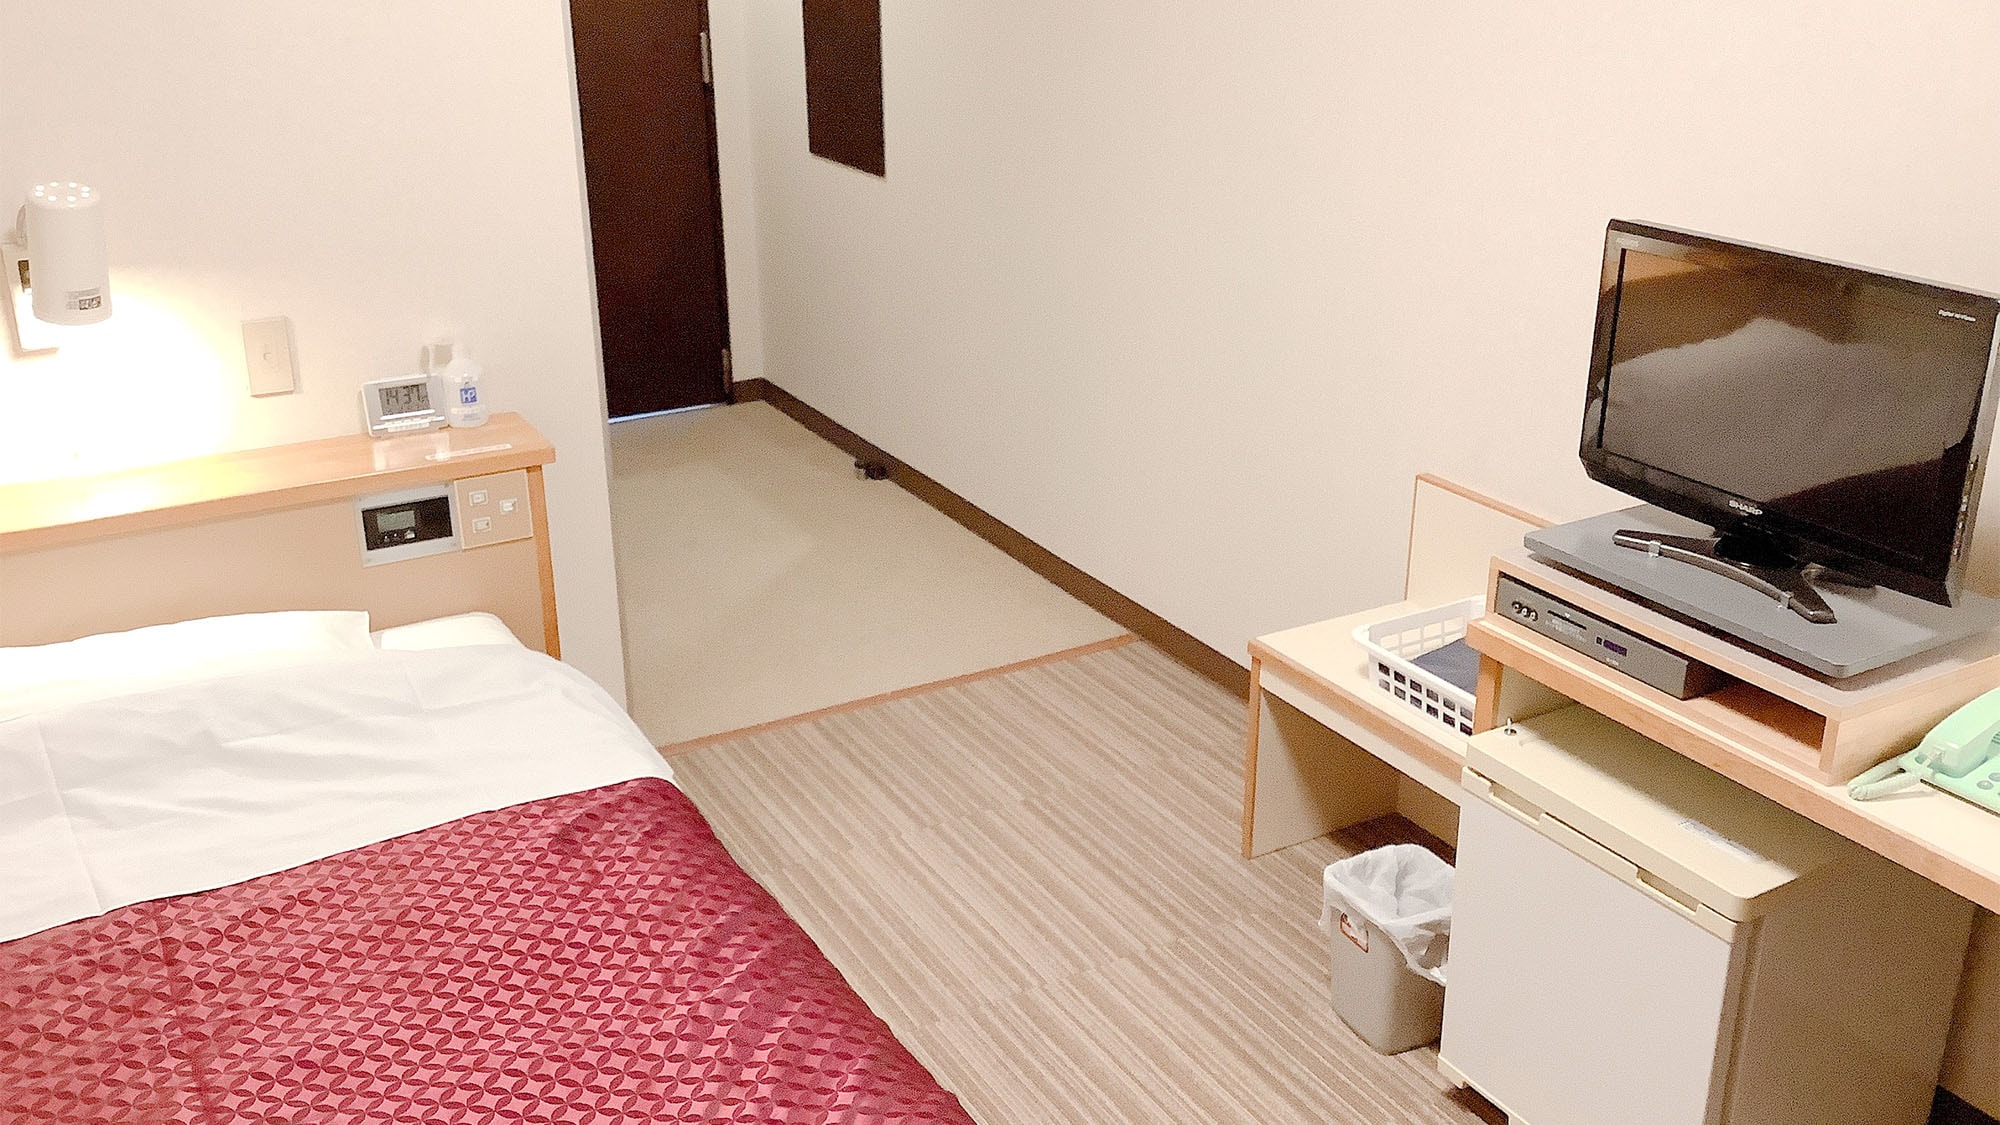 ・ [Semi-double room] We have a large bed with a bed width of 120 cm.